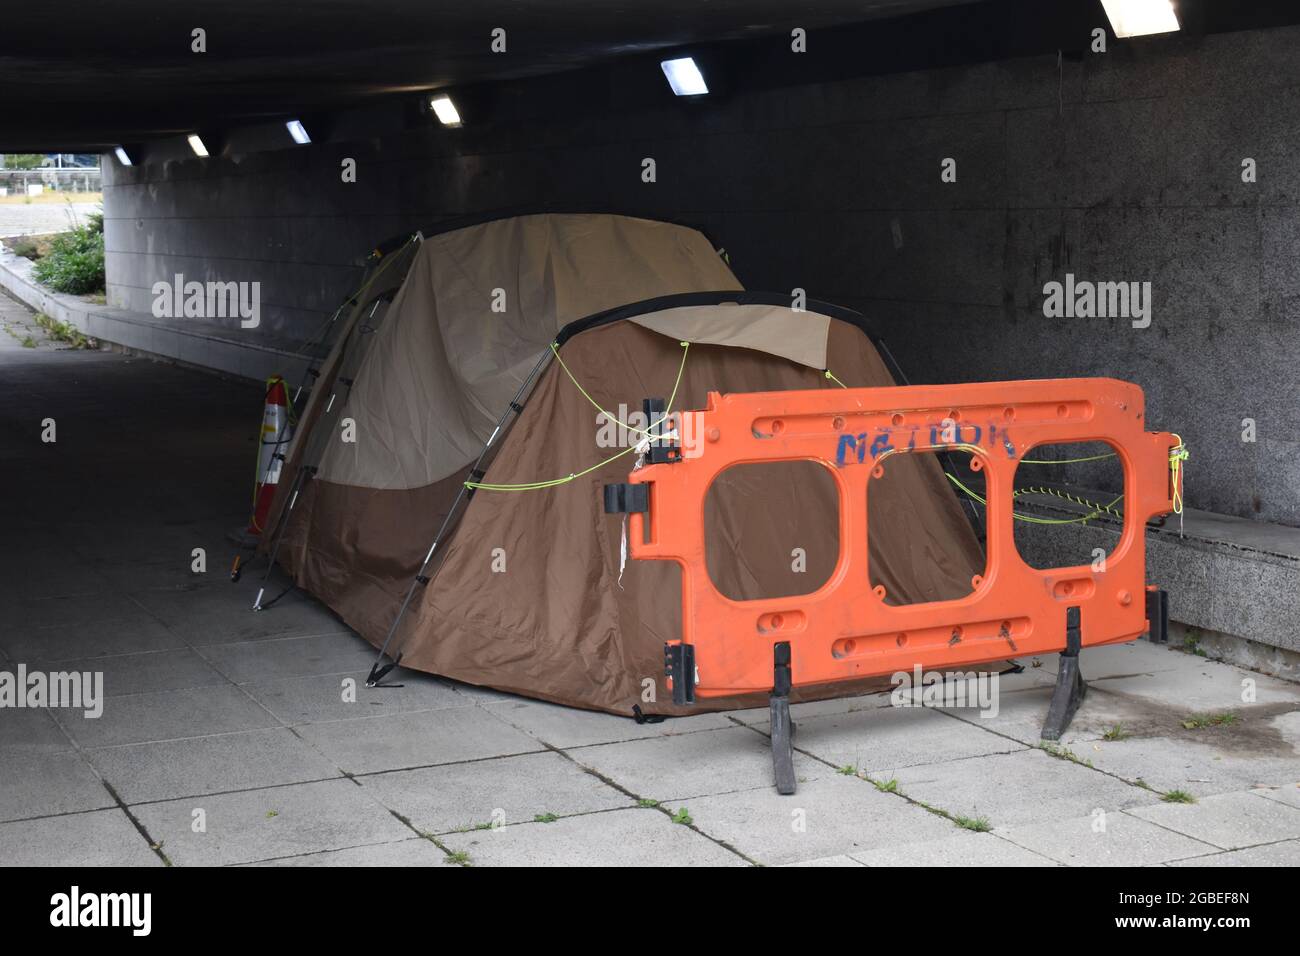 Homeless person's tent in an underpass in Central Milton Keynes. Stock Photo